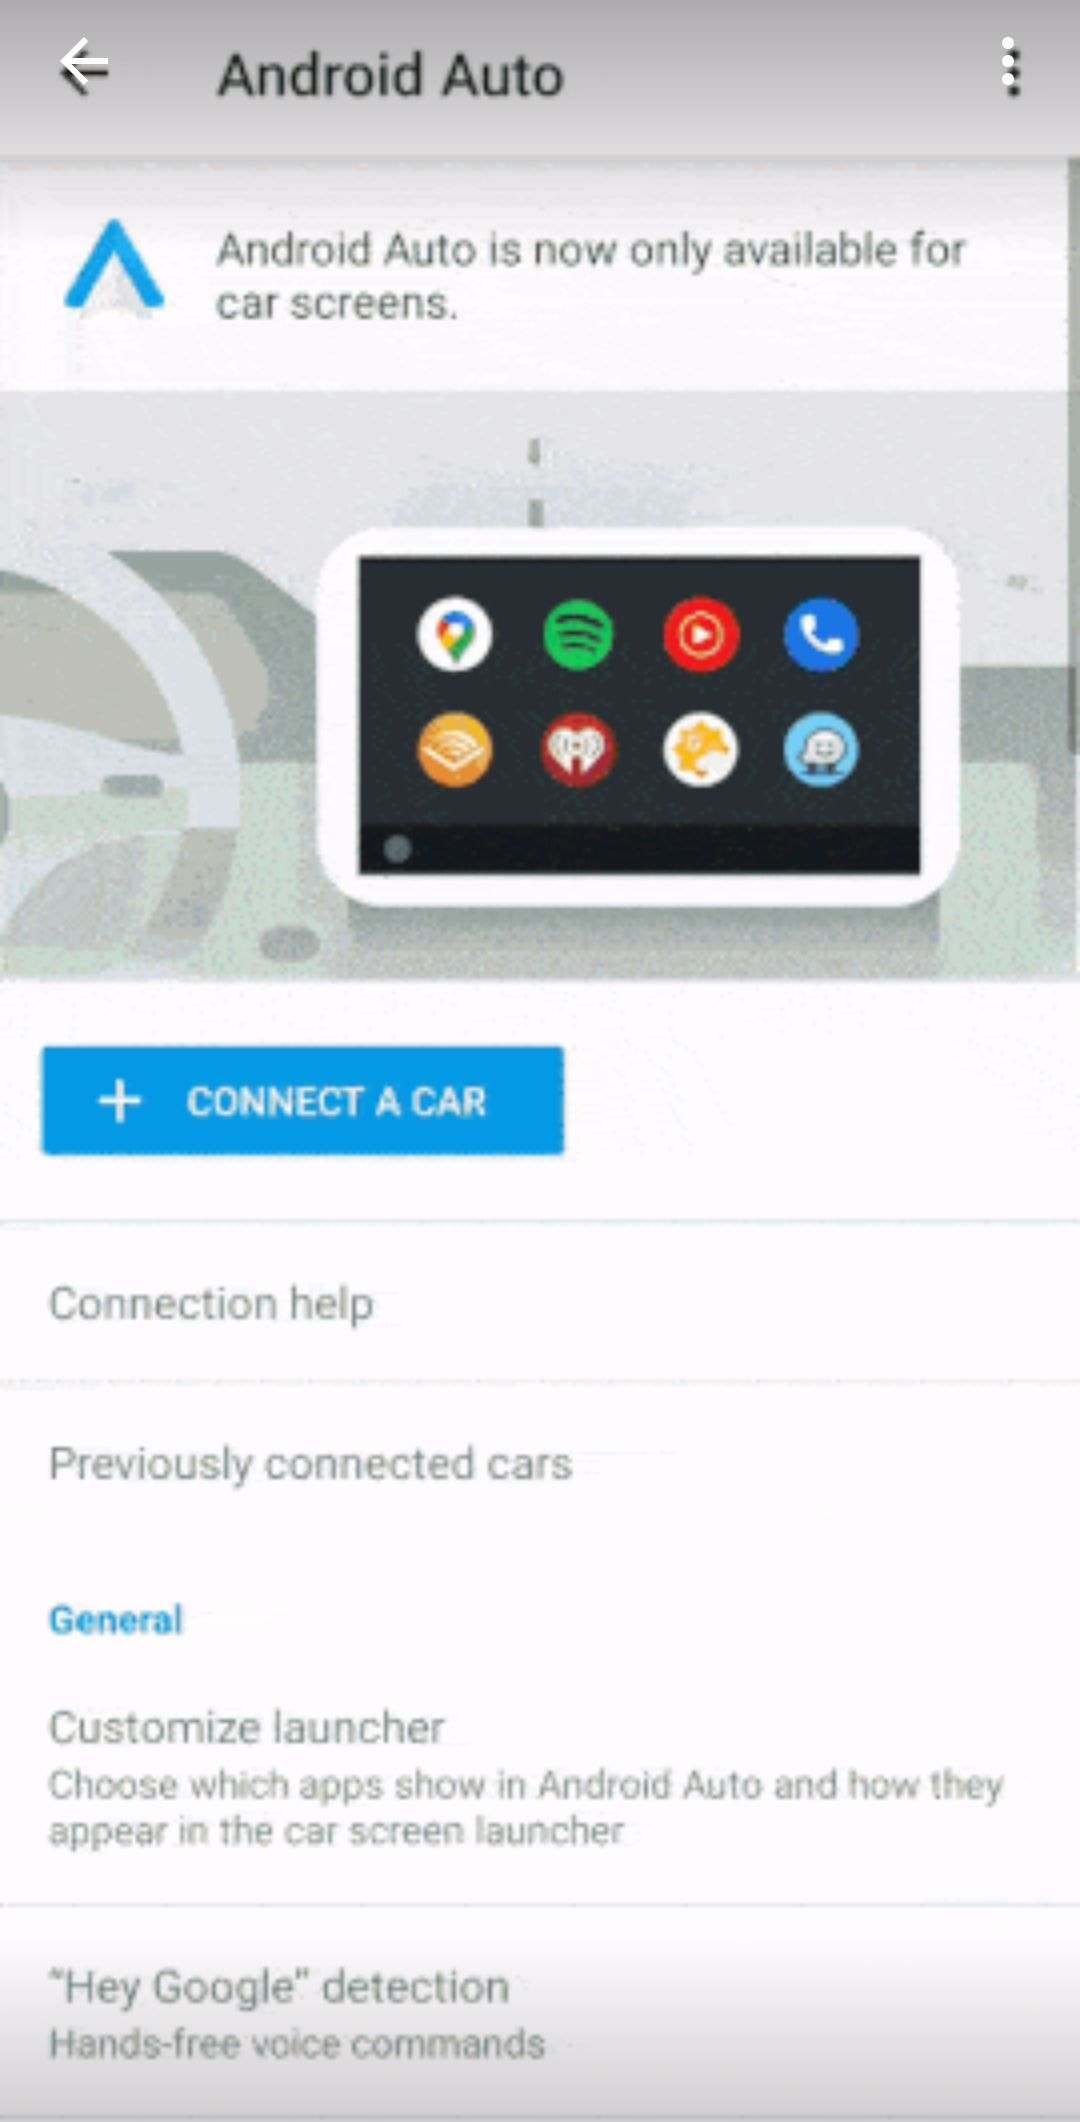 Android Auto is now exclusive to car screens